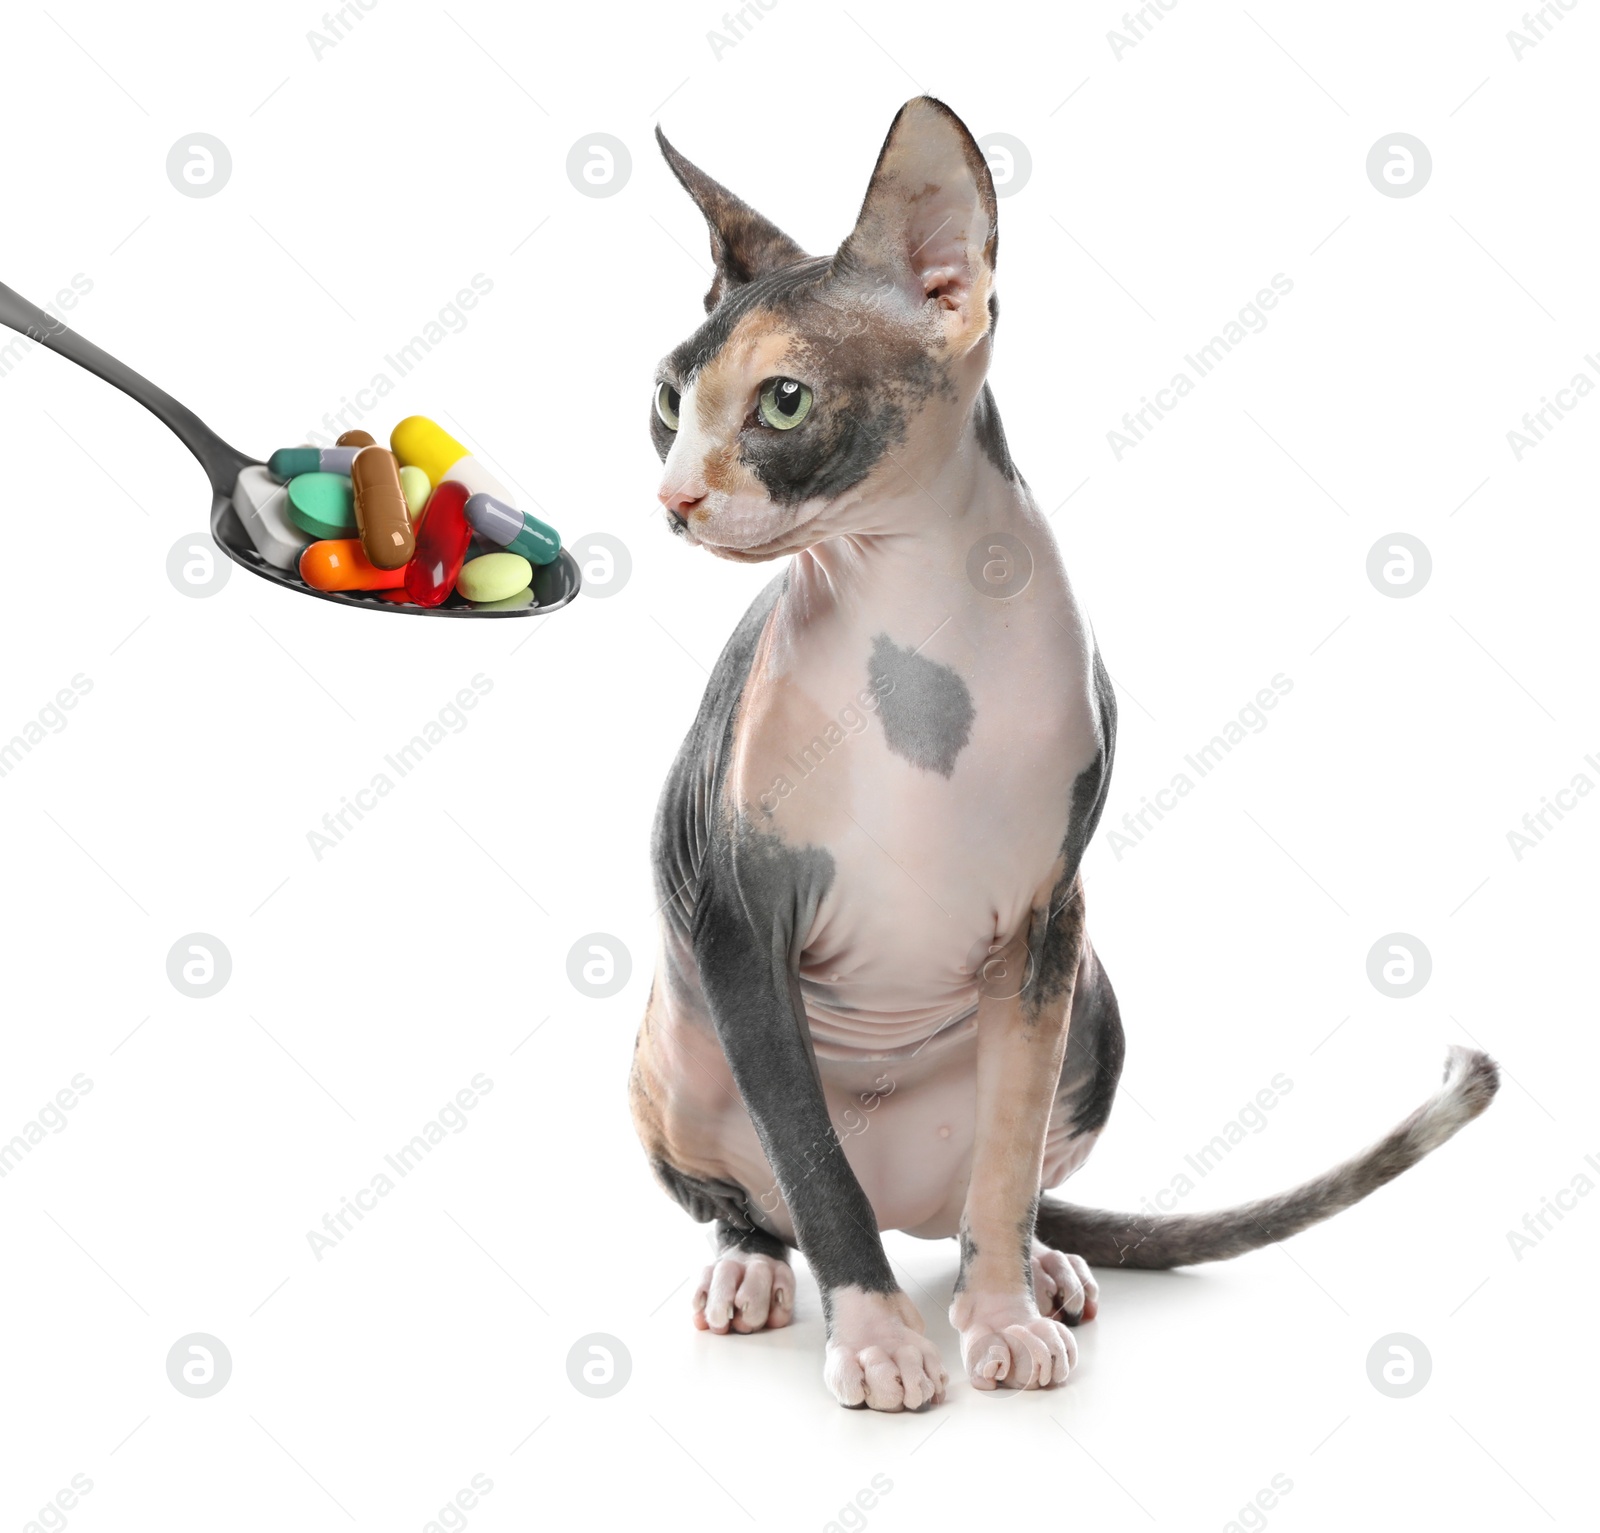 Image of Vitamins for pets. Cute cat and spoon with different pills on white background